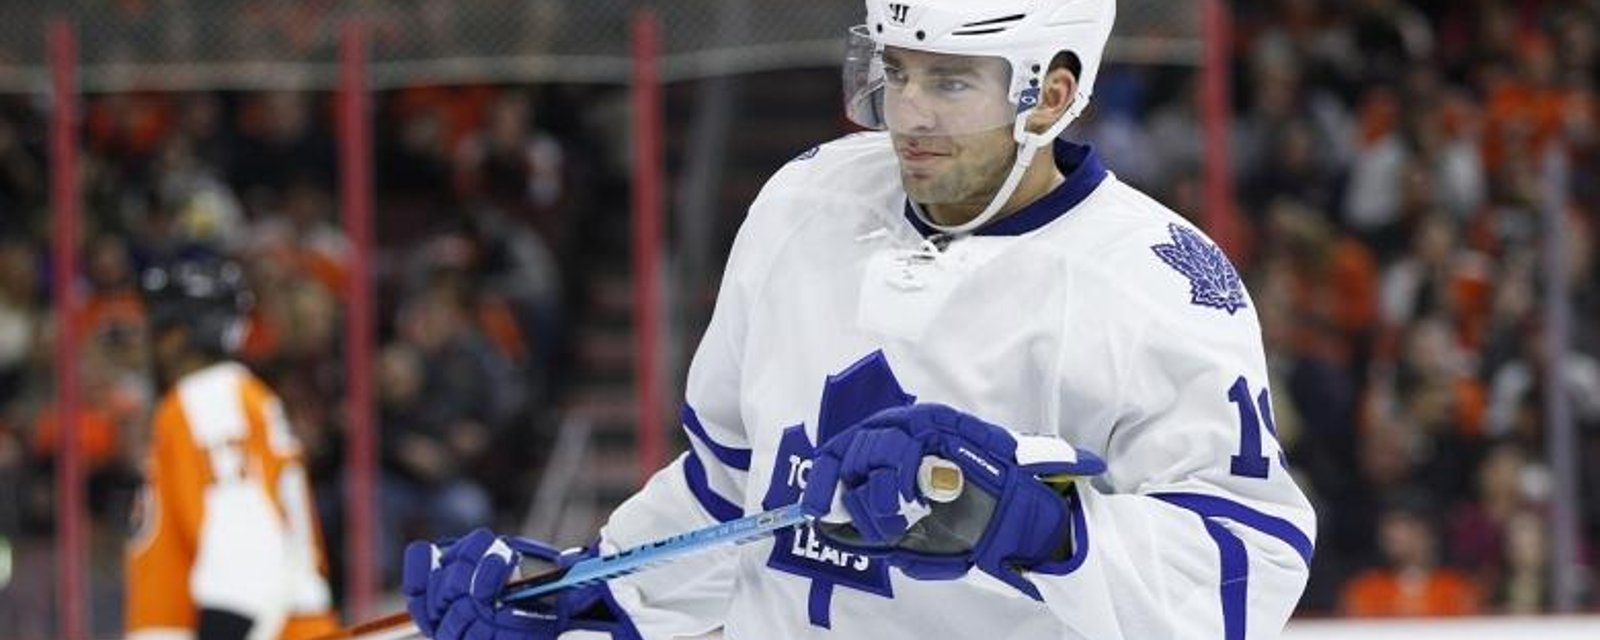 Two big question marks around two players remain in offseason for Leafs.